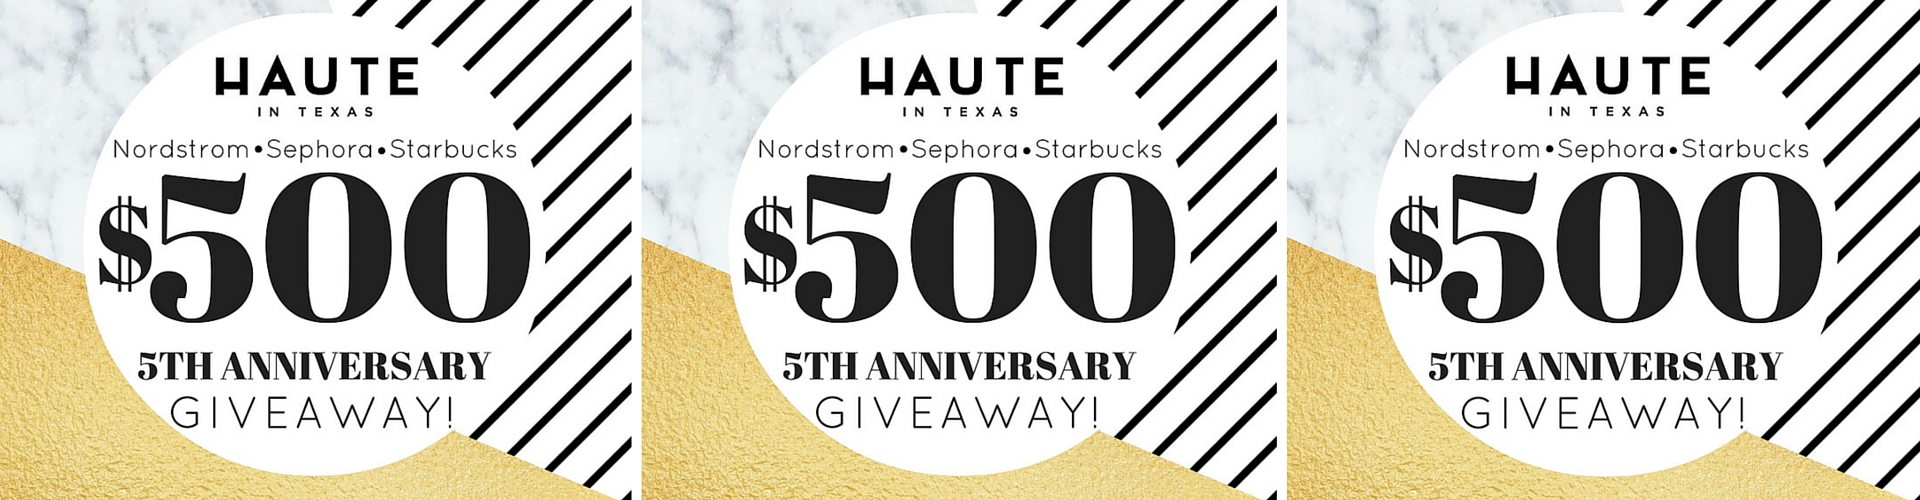 $500 Giveaway for Haute in Texas’ 5th Anniversary!